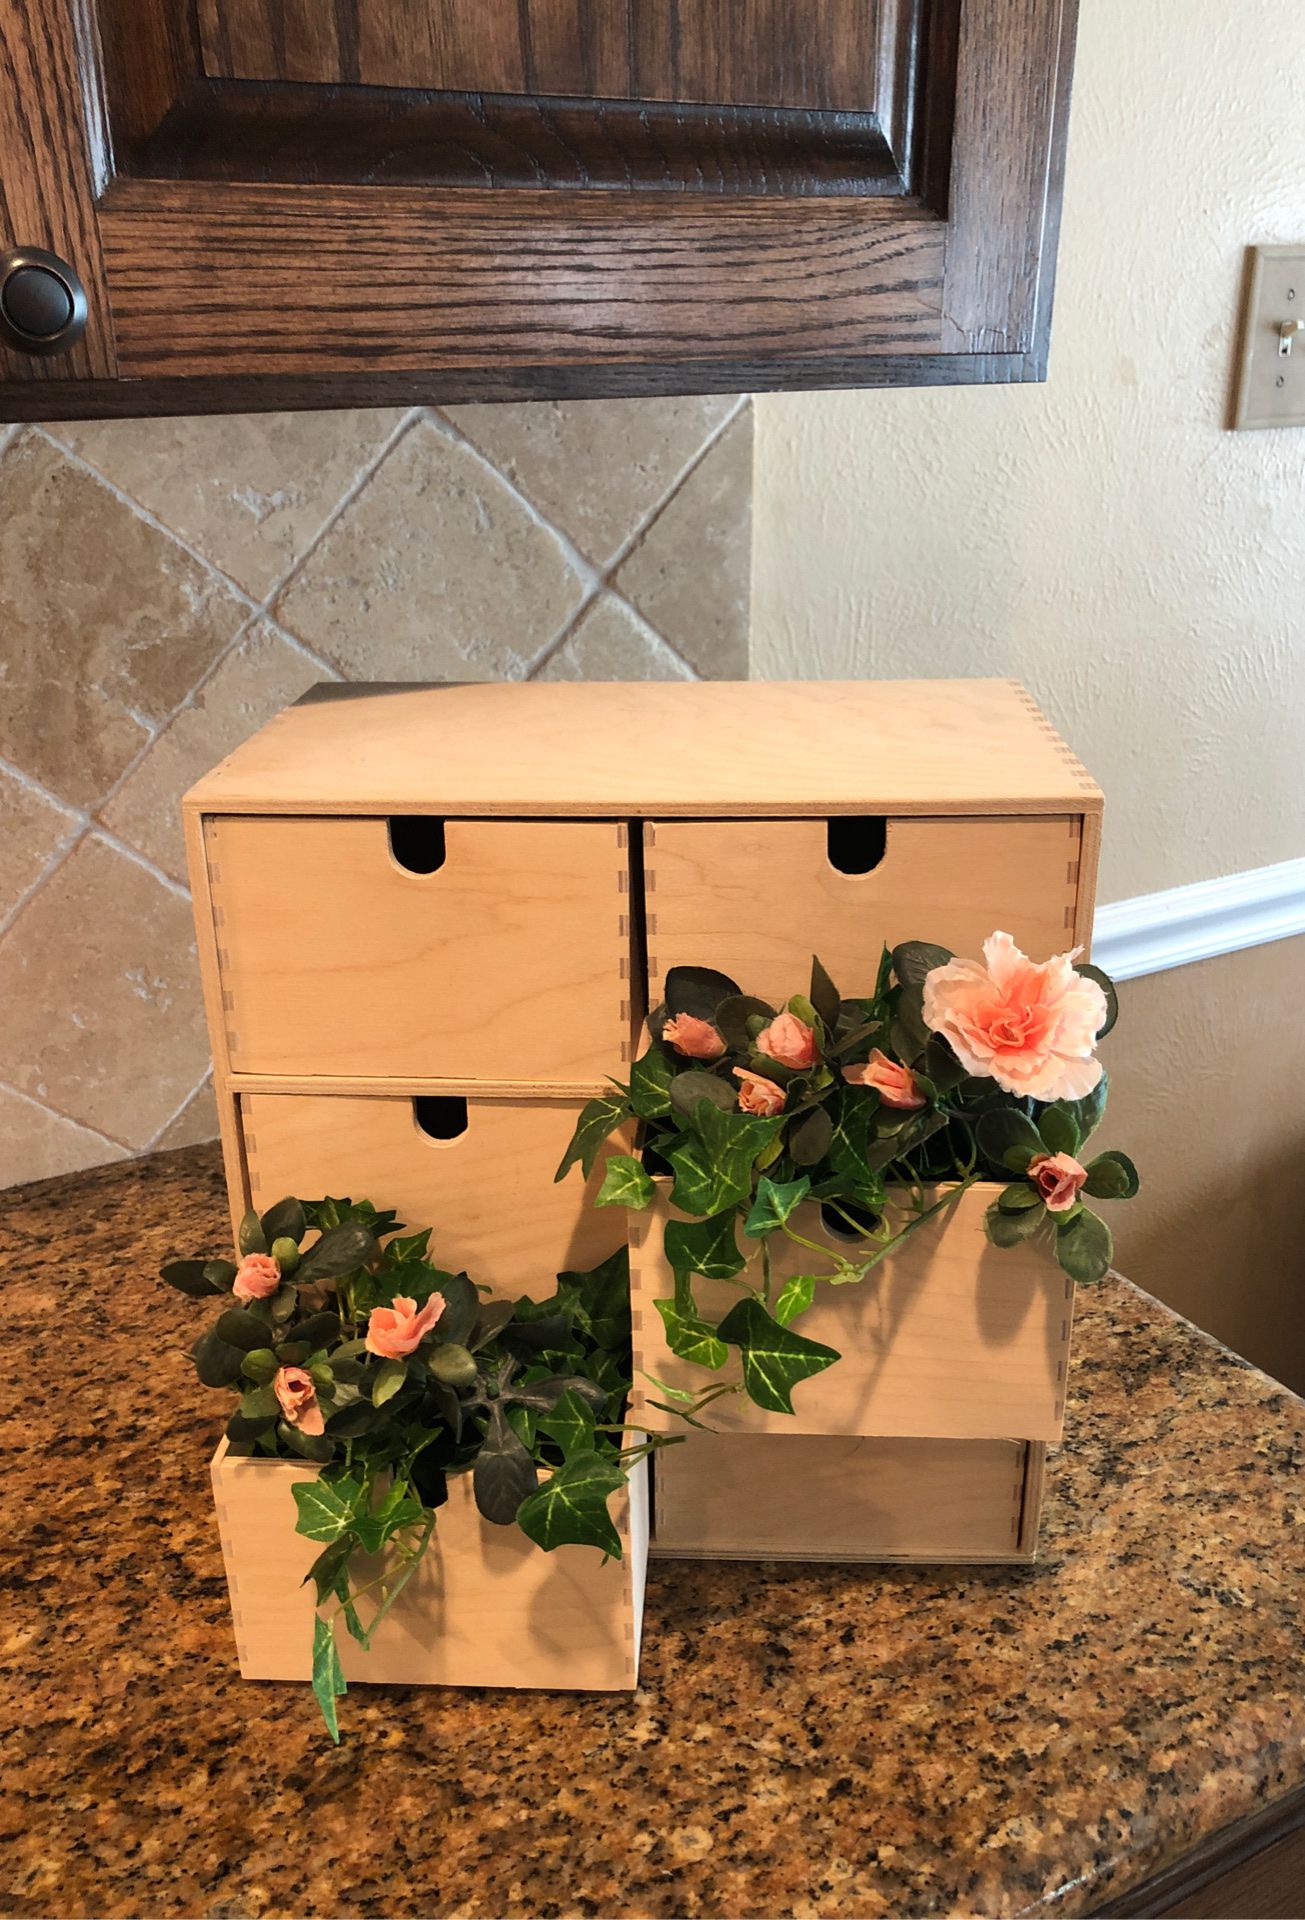 Wooden cubby shelf organizer greenery and floral 15 with or without greenery